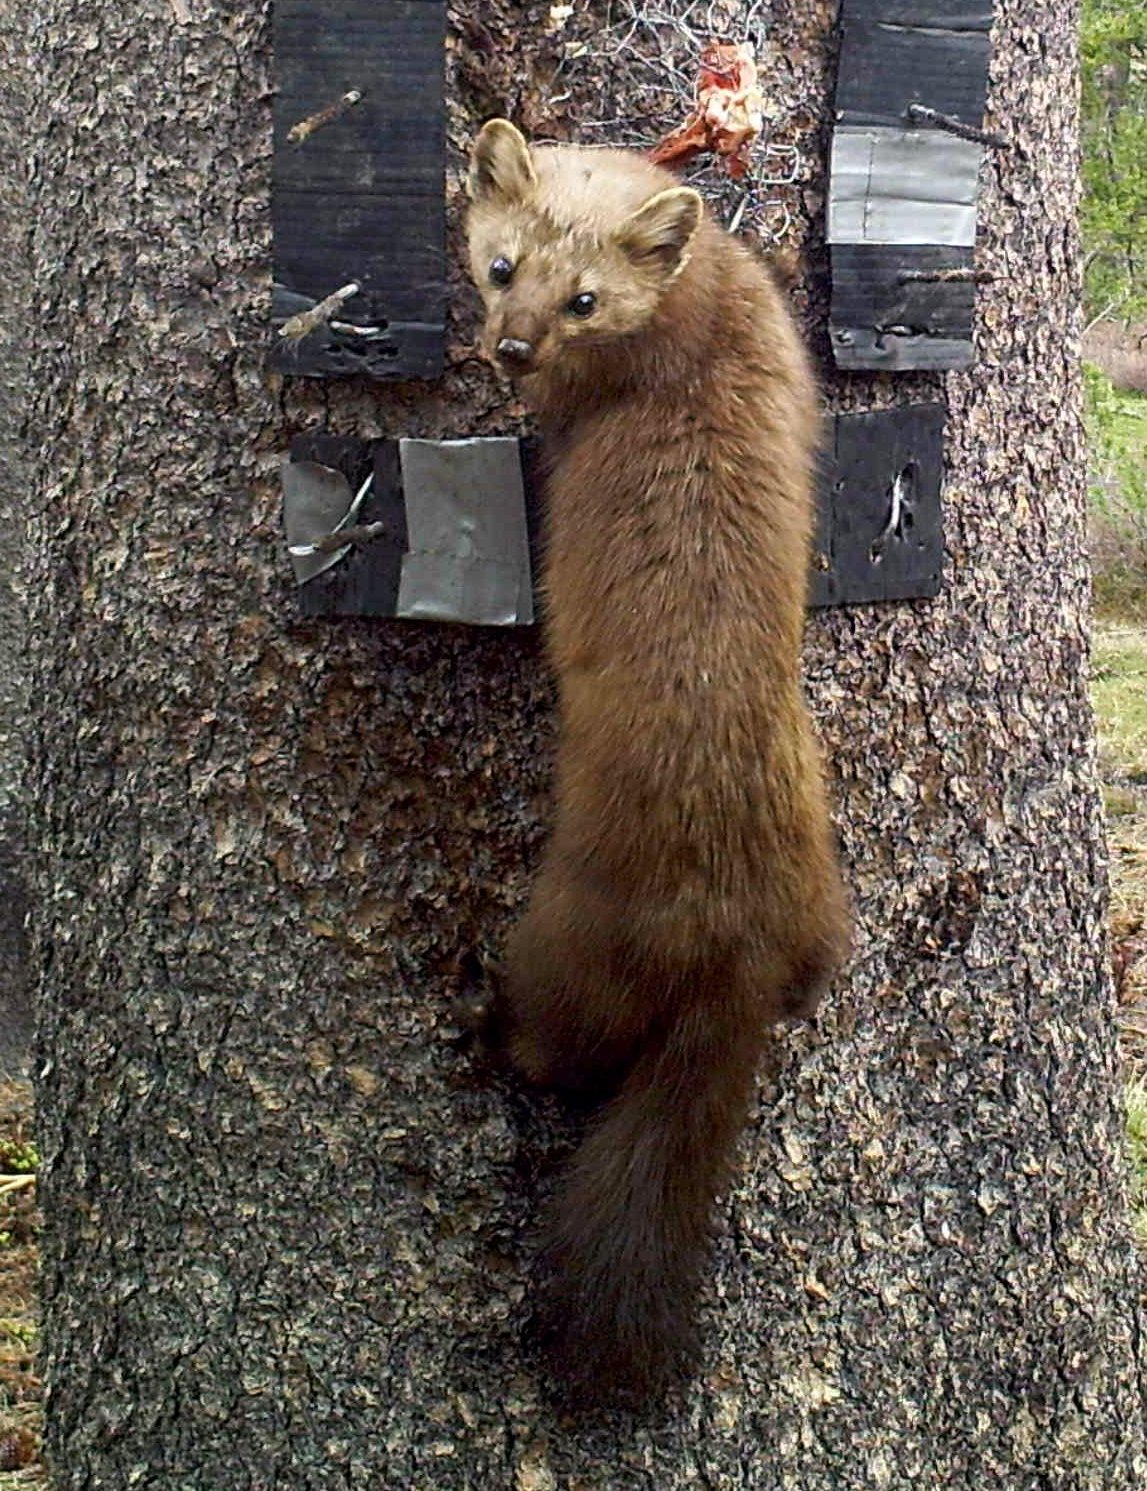 Pacific marten visiting a camera station from the Sierra Nevada Carnivore Monitoring Program